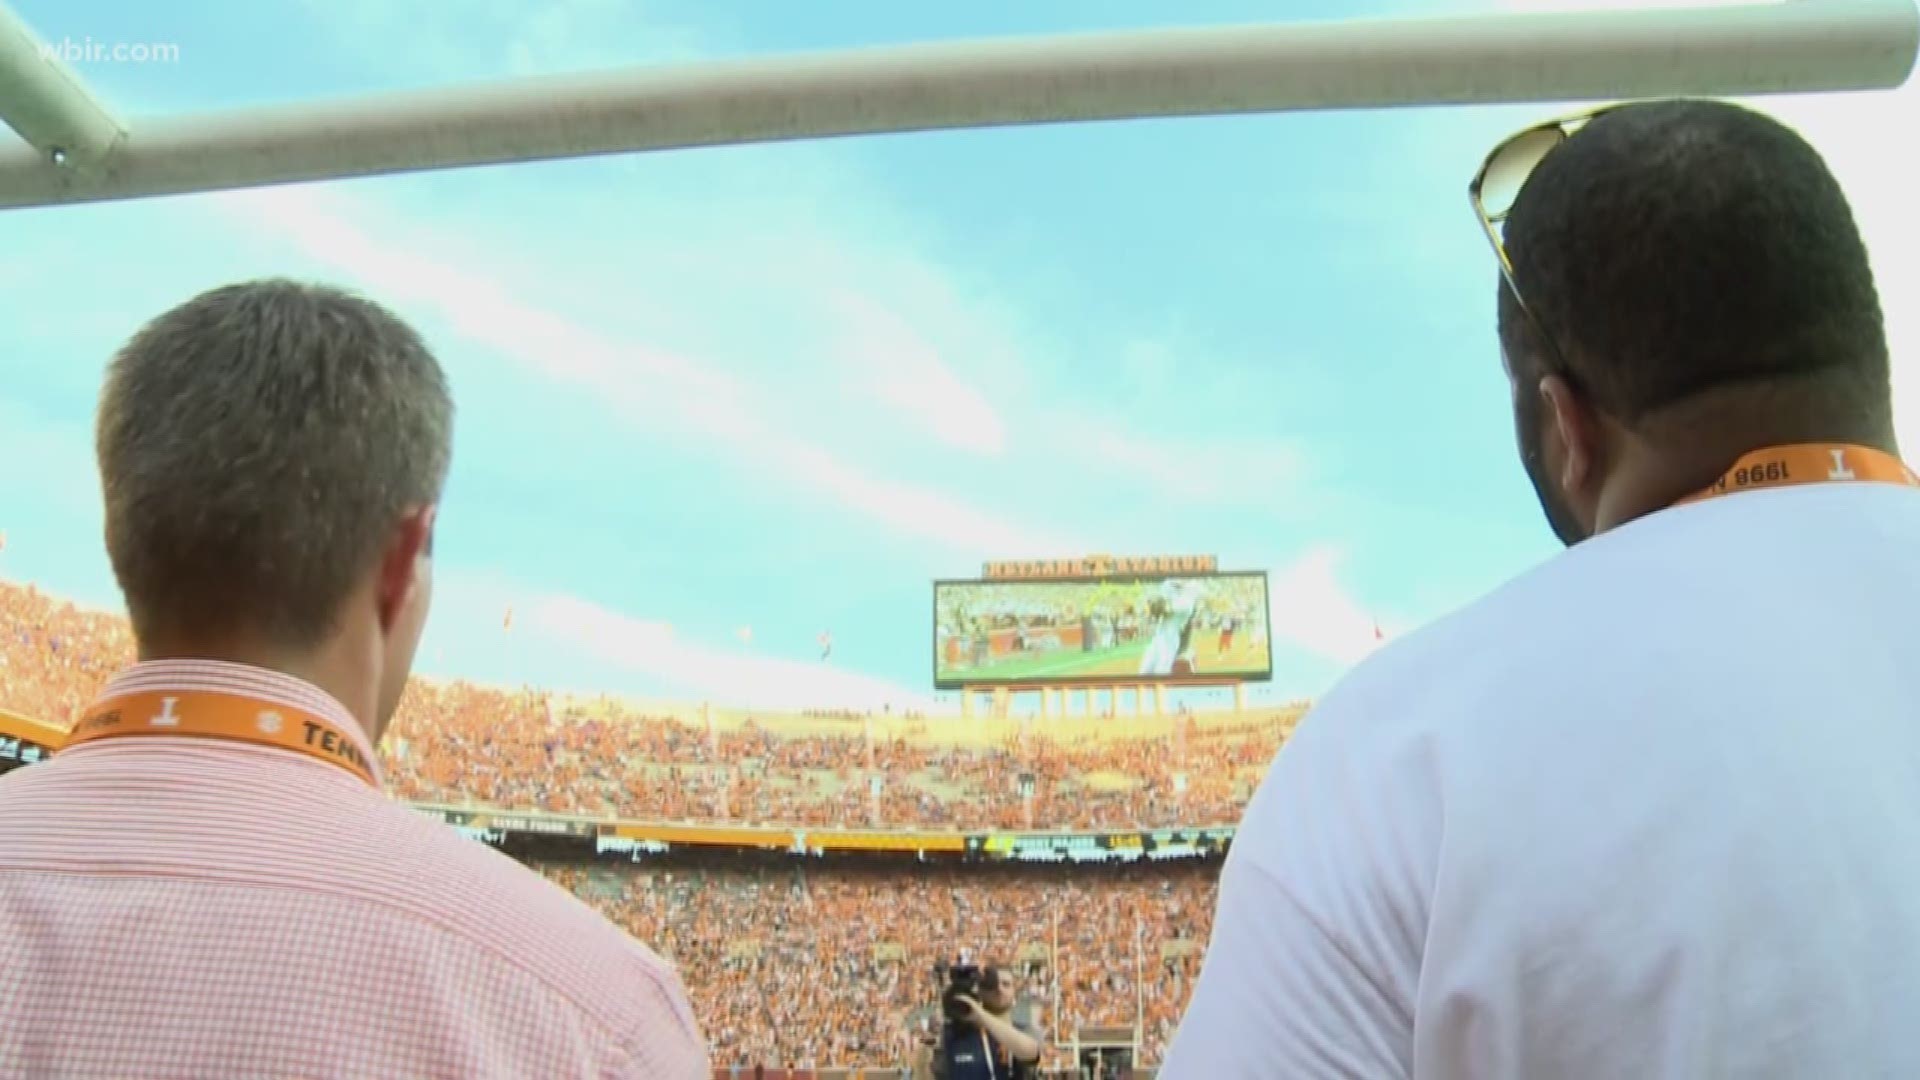 As part of taking on the Gators tonight, the Vols honored the 1998 Championship team.